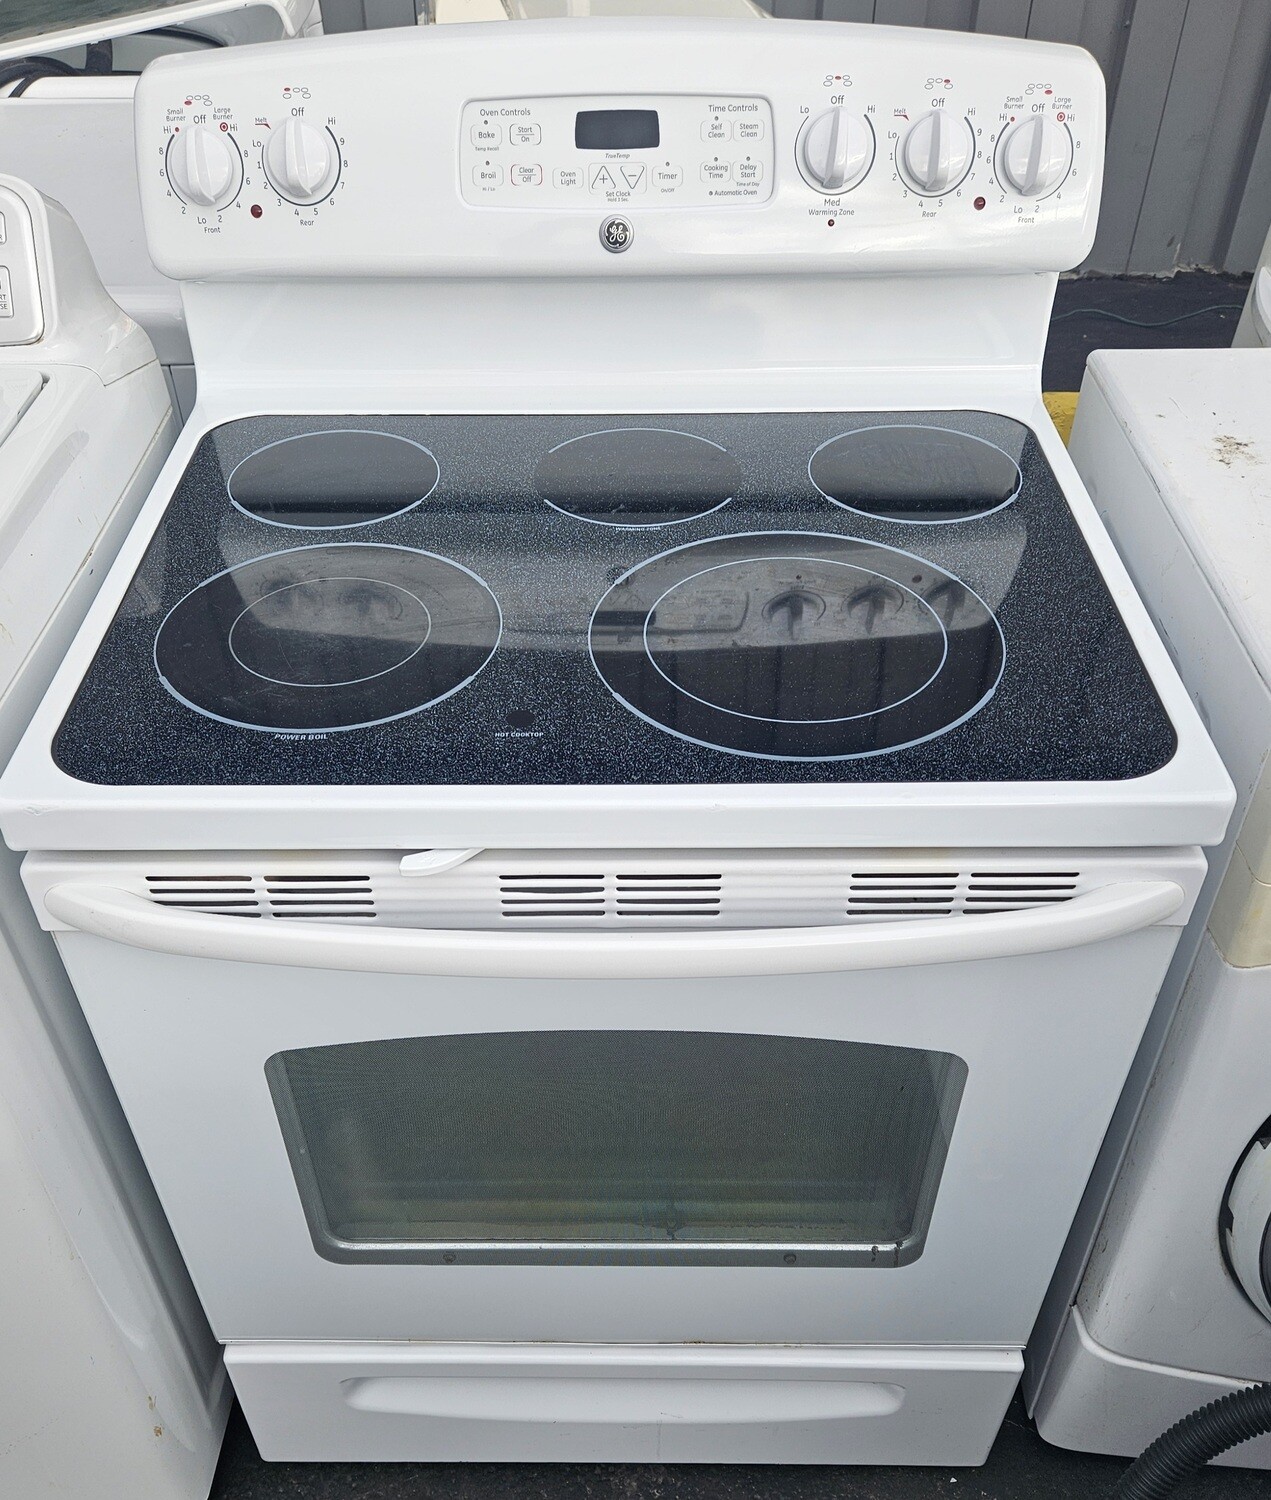 30" GE White Smooth Top Electric Powered Range Stove Oven